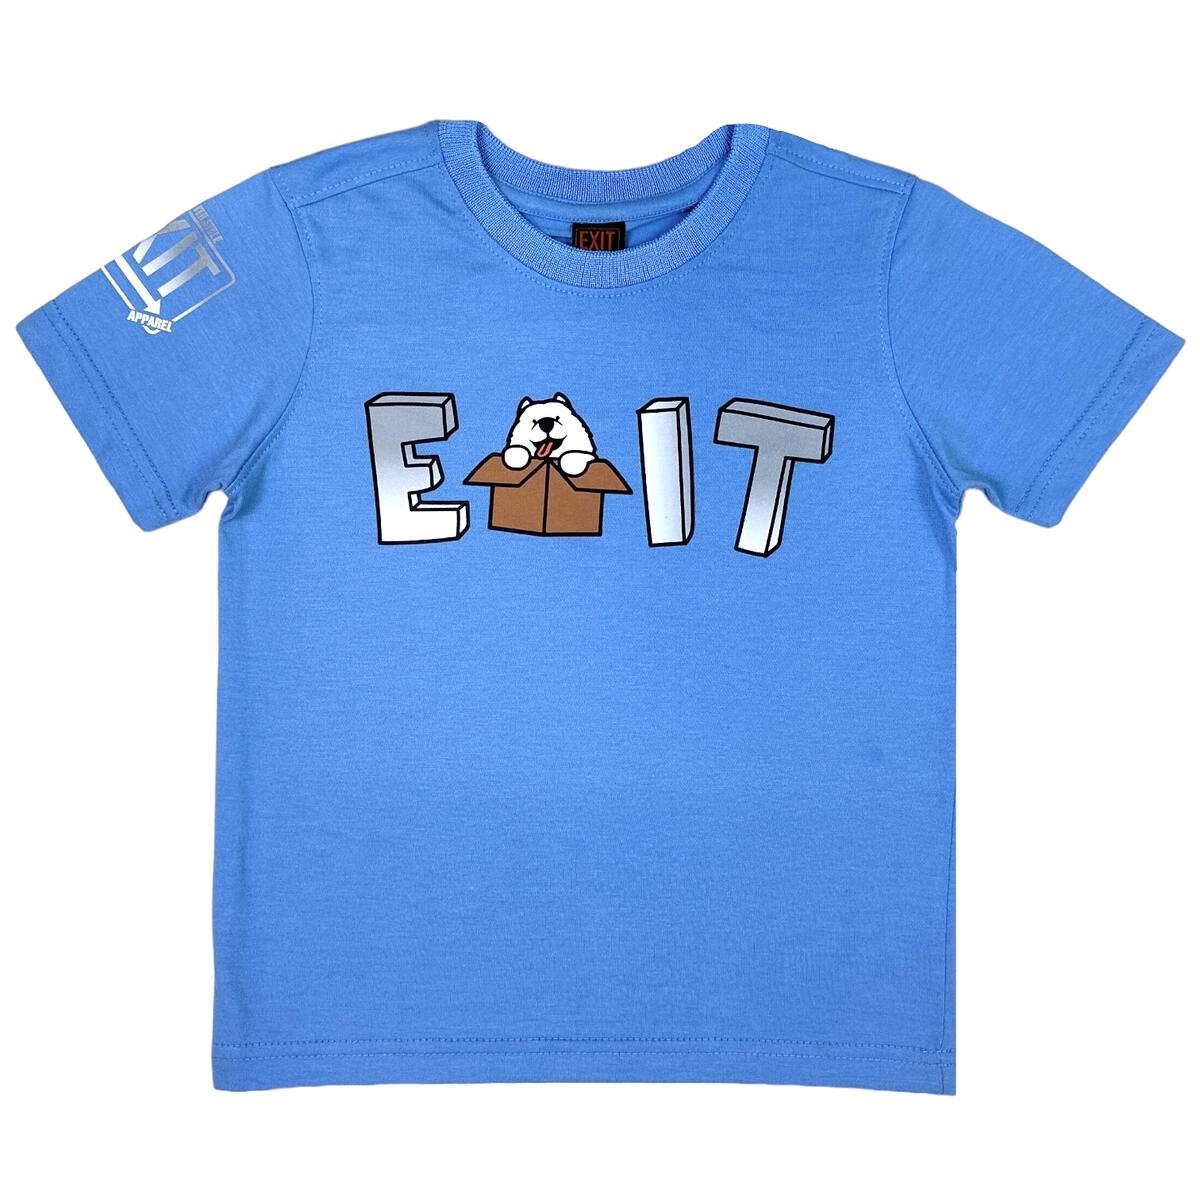 Kids "Out of the Box" Tee - Blue